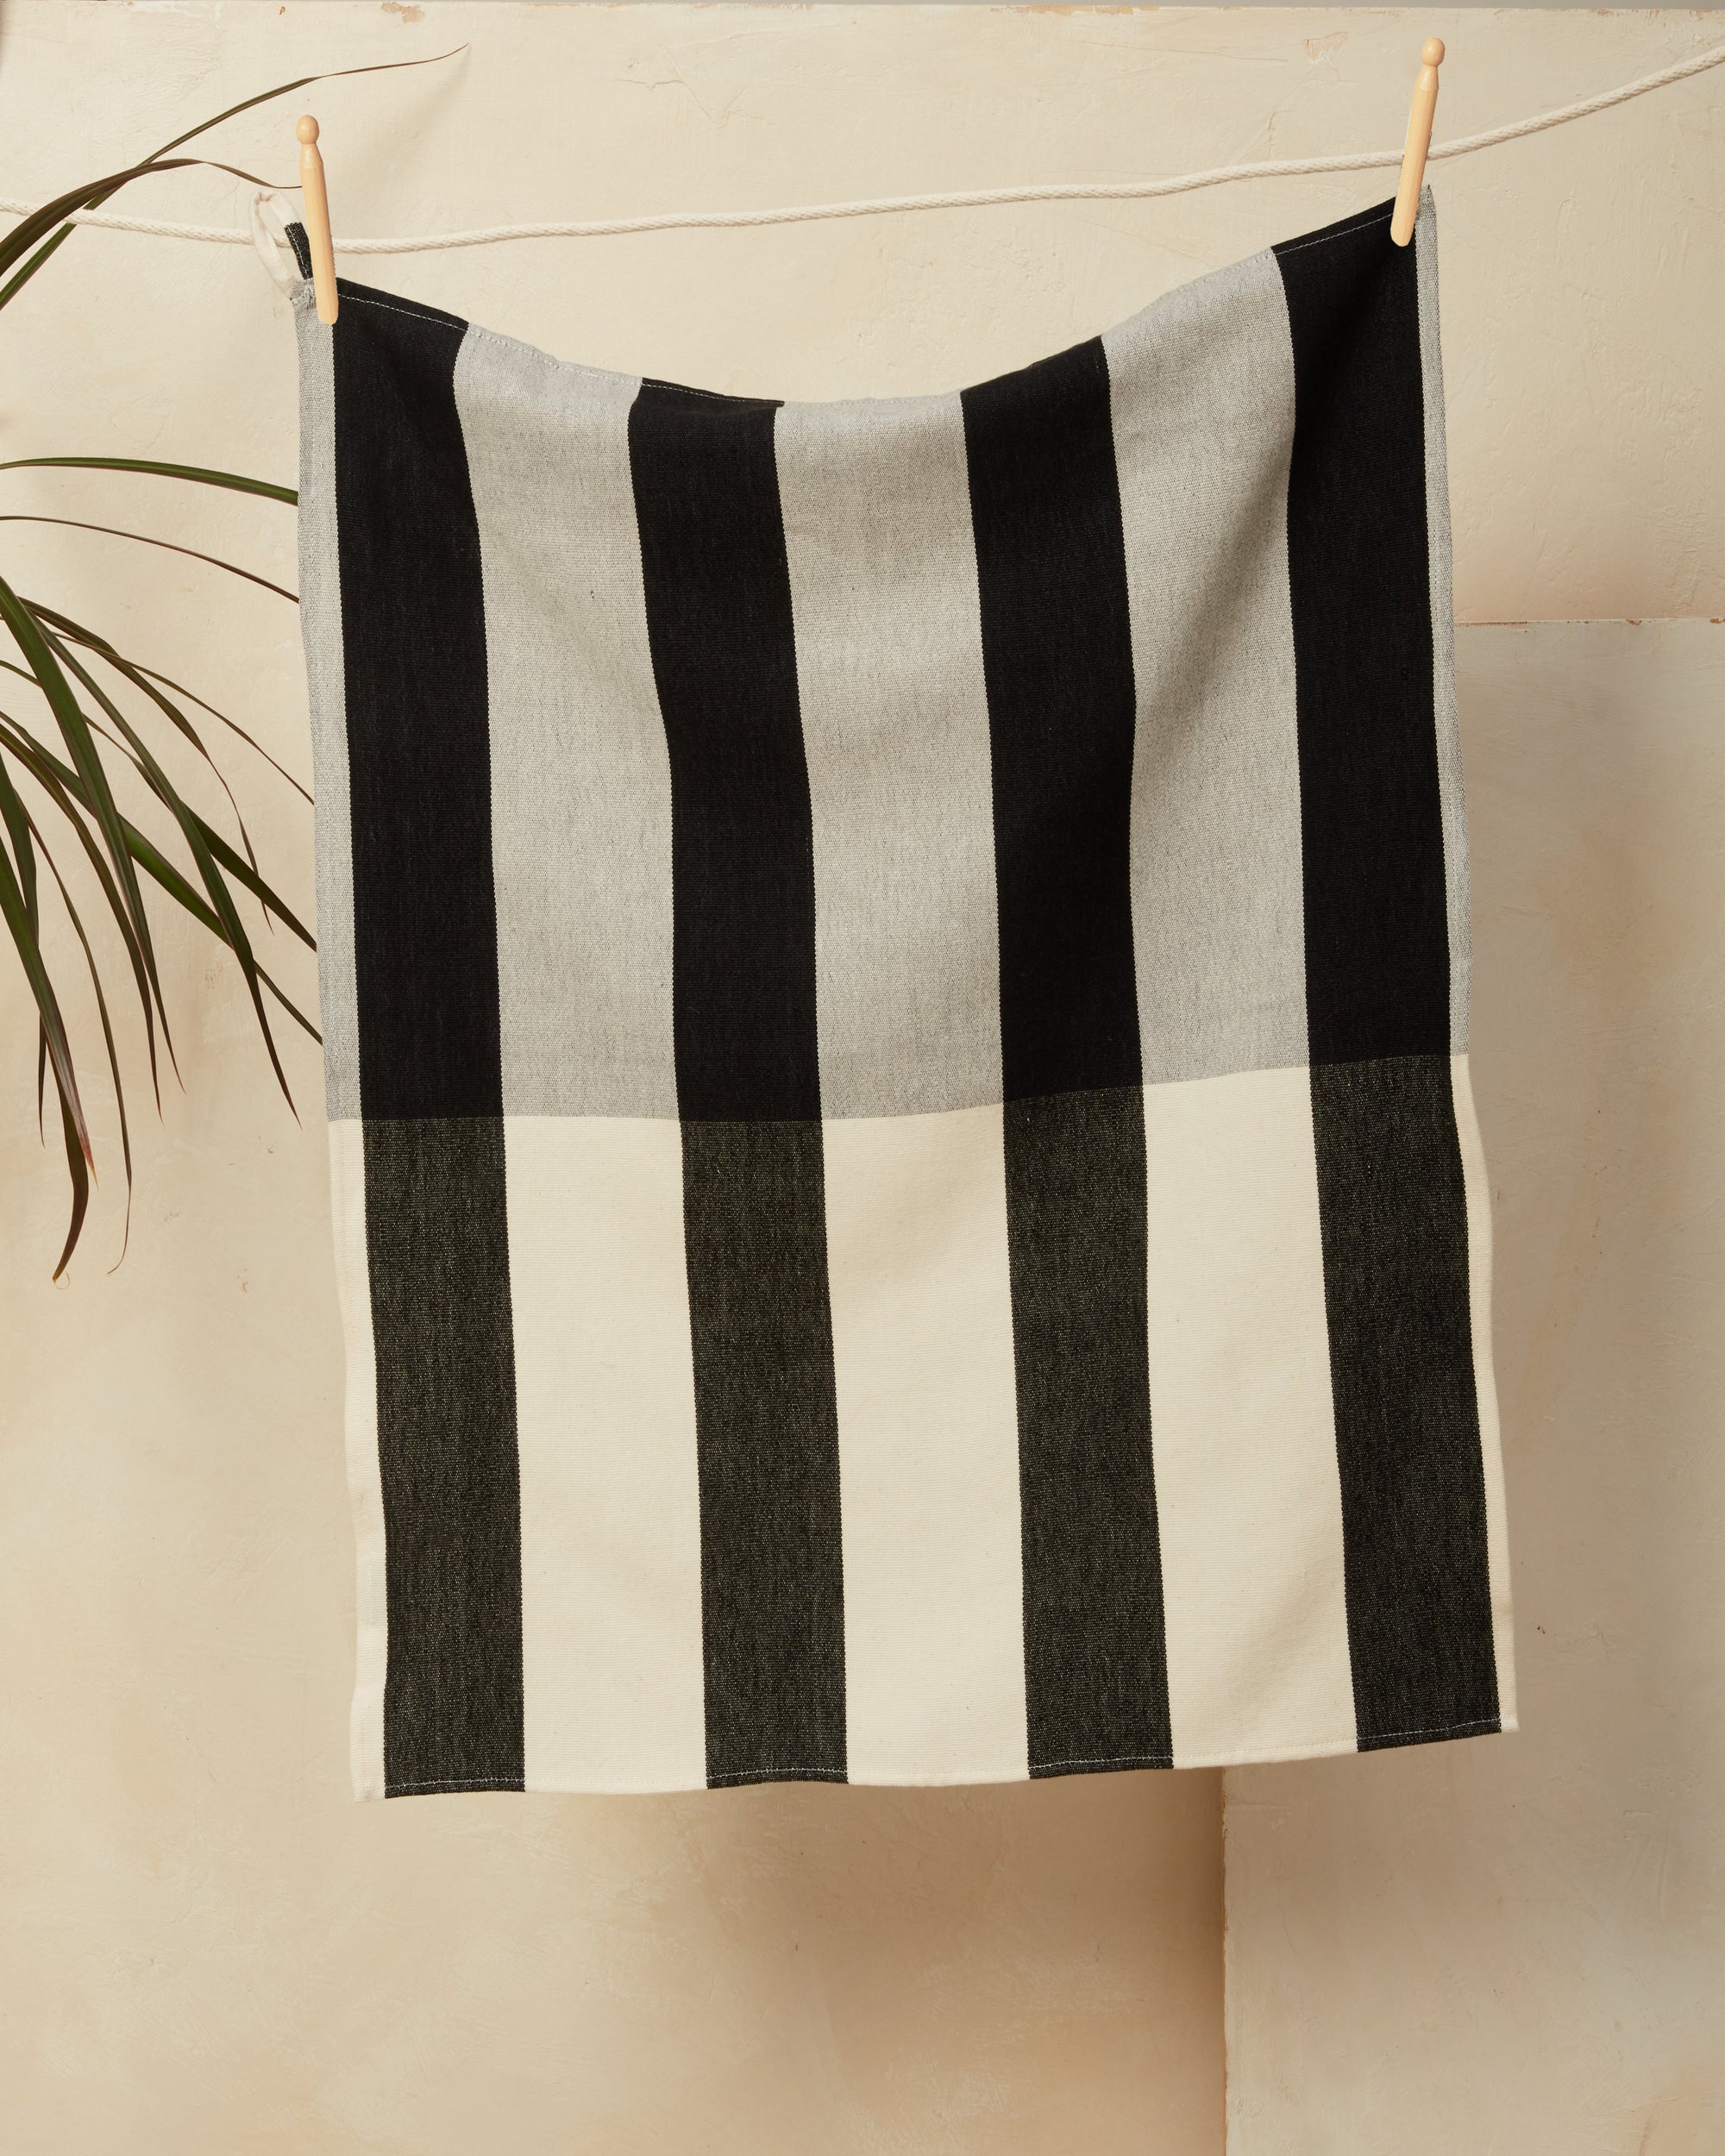 black and white striped tea towel, hand towel, kitchen towel. ethically handwoven cotton MINNA Sol Towel in Black.